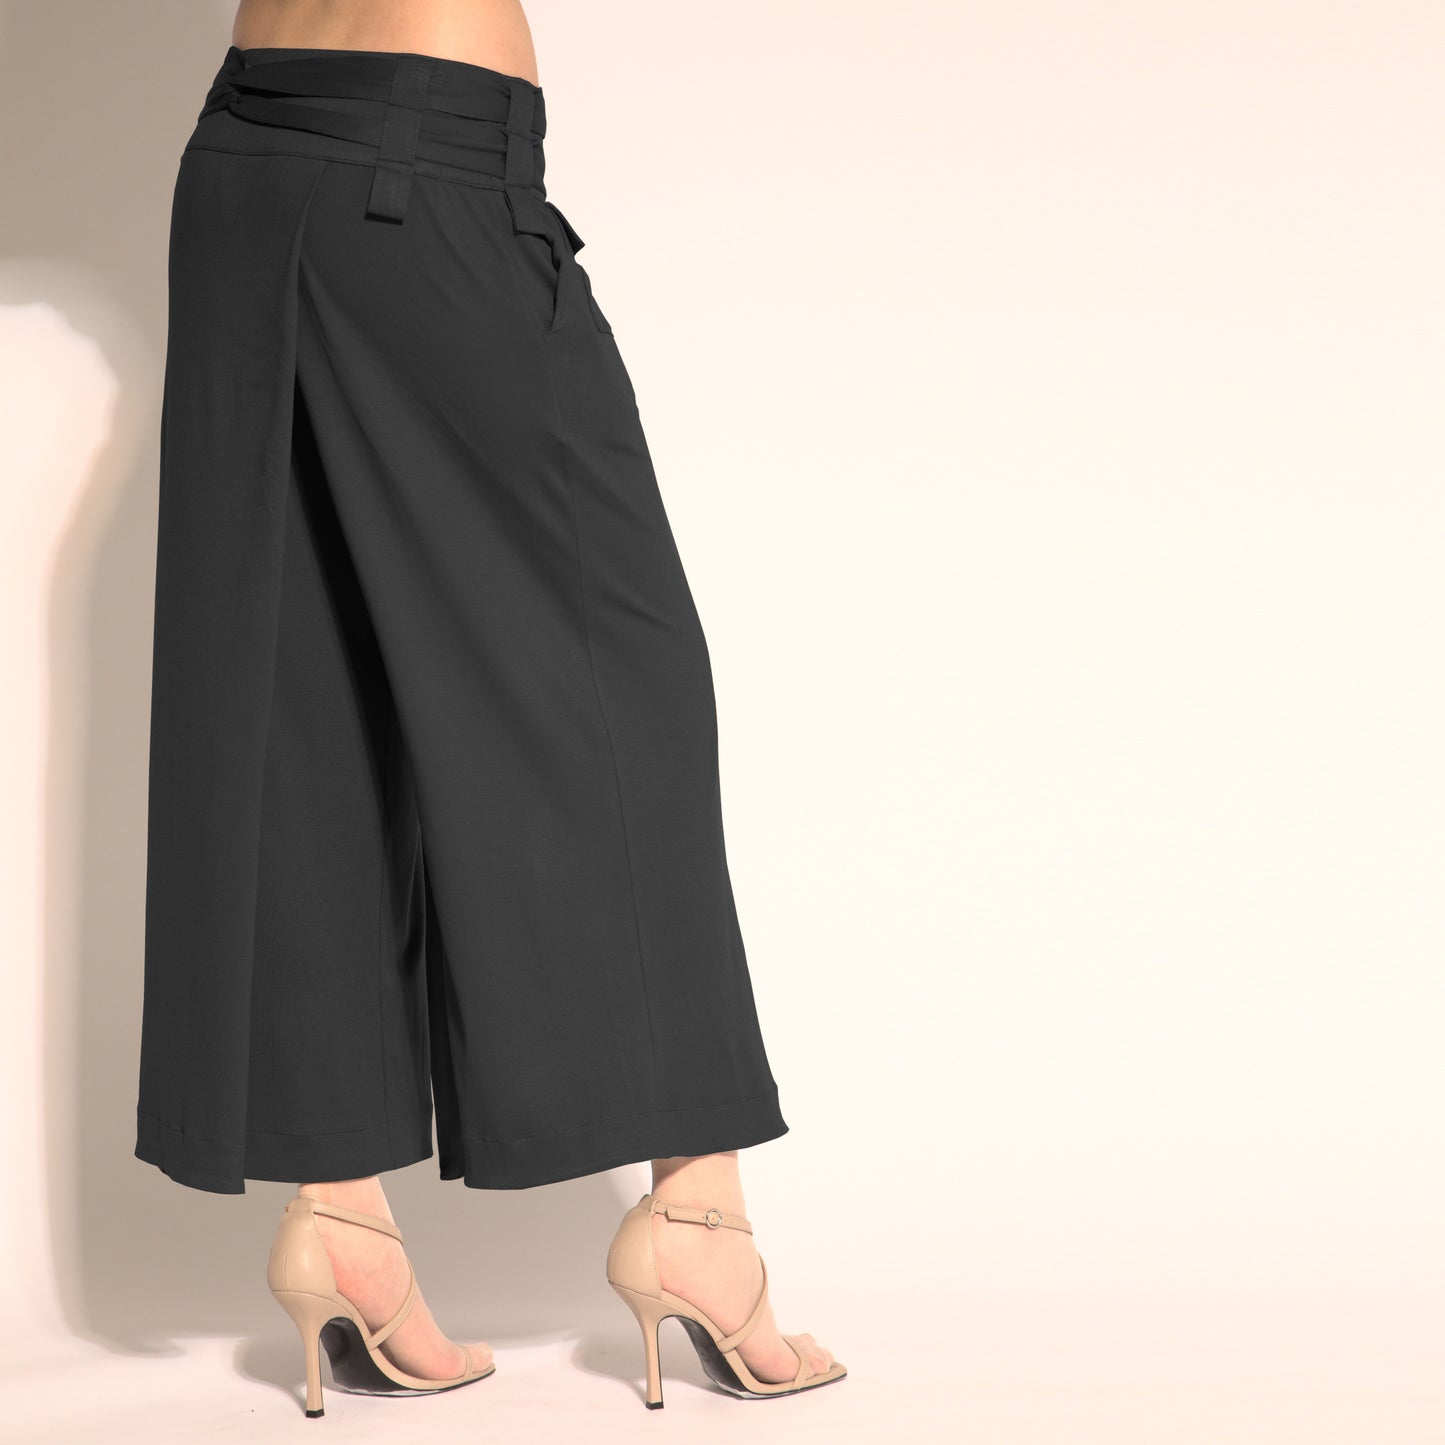 Aurora - Skirt-pants with with belt and buckle